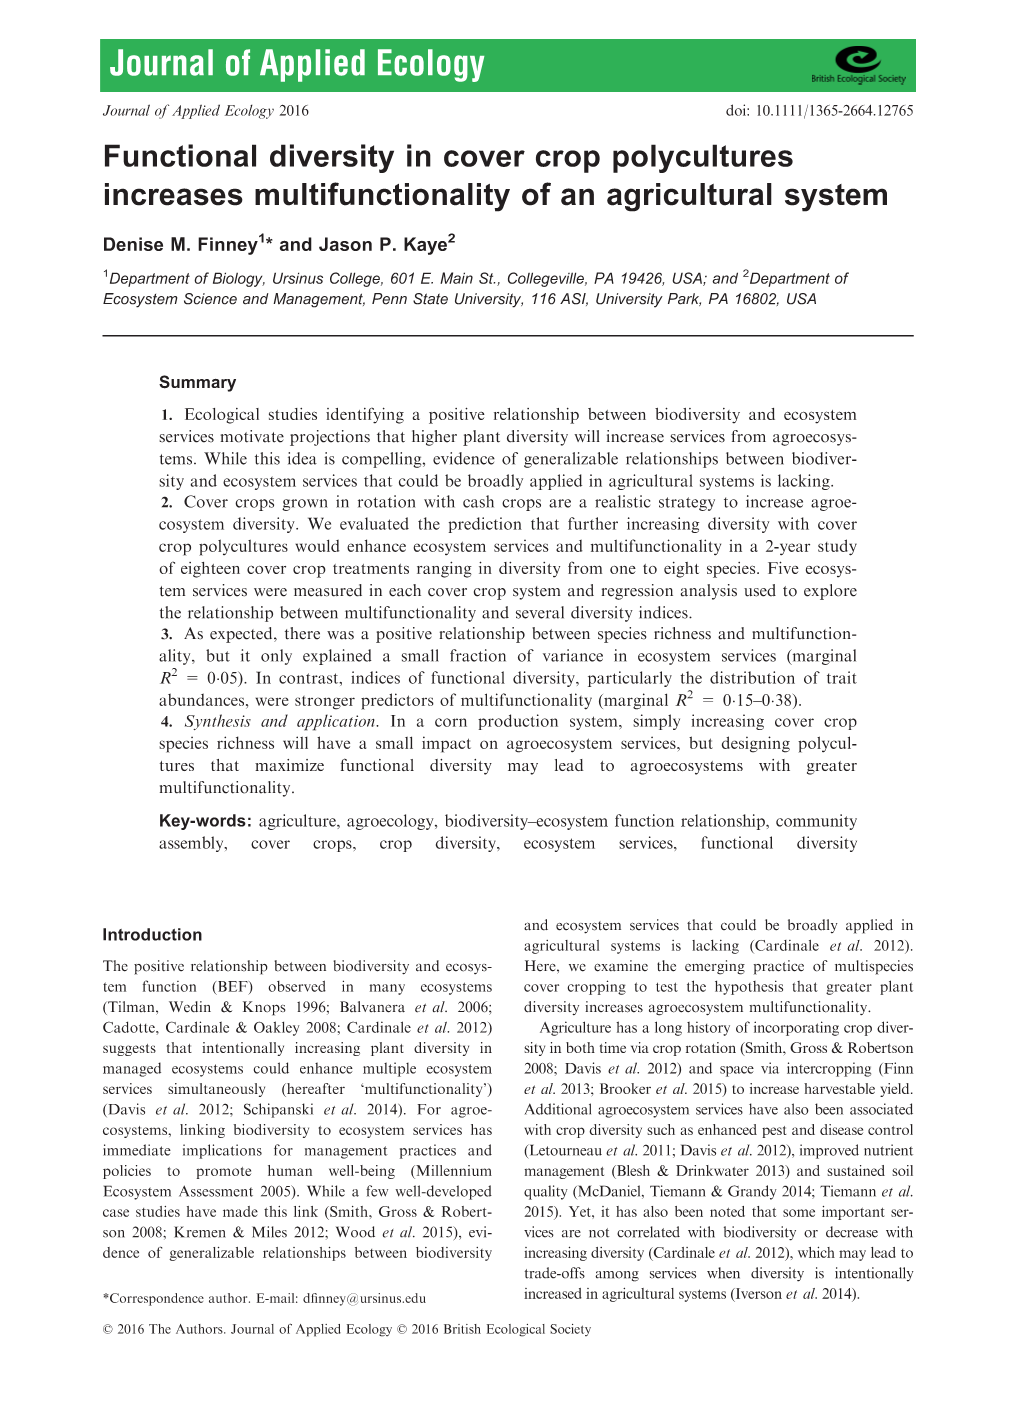 Functional Diversity in Cover Crop Polycultures Increases Multifunctionality of an Agricultural System